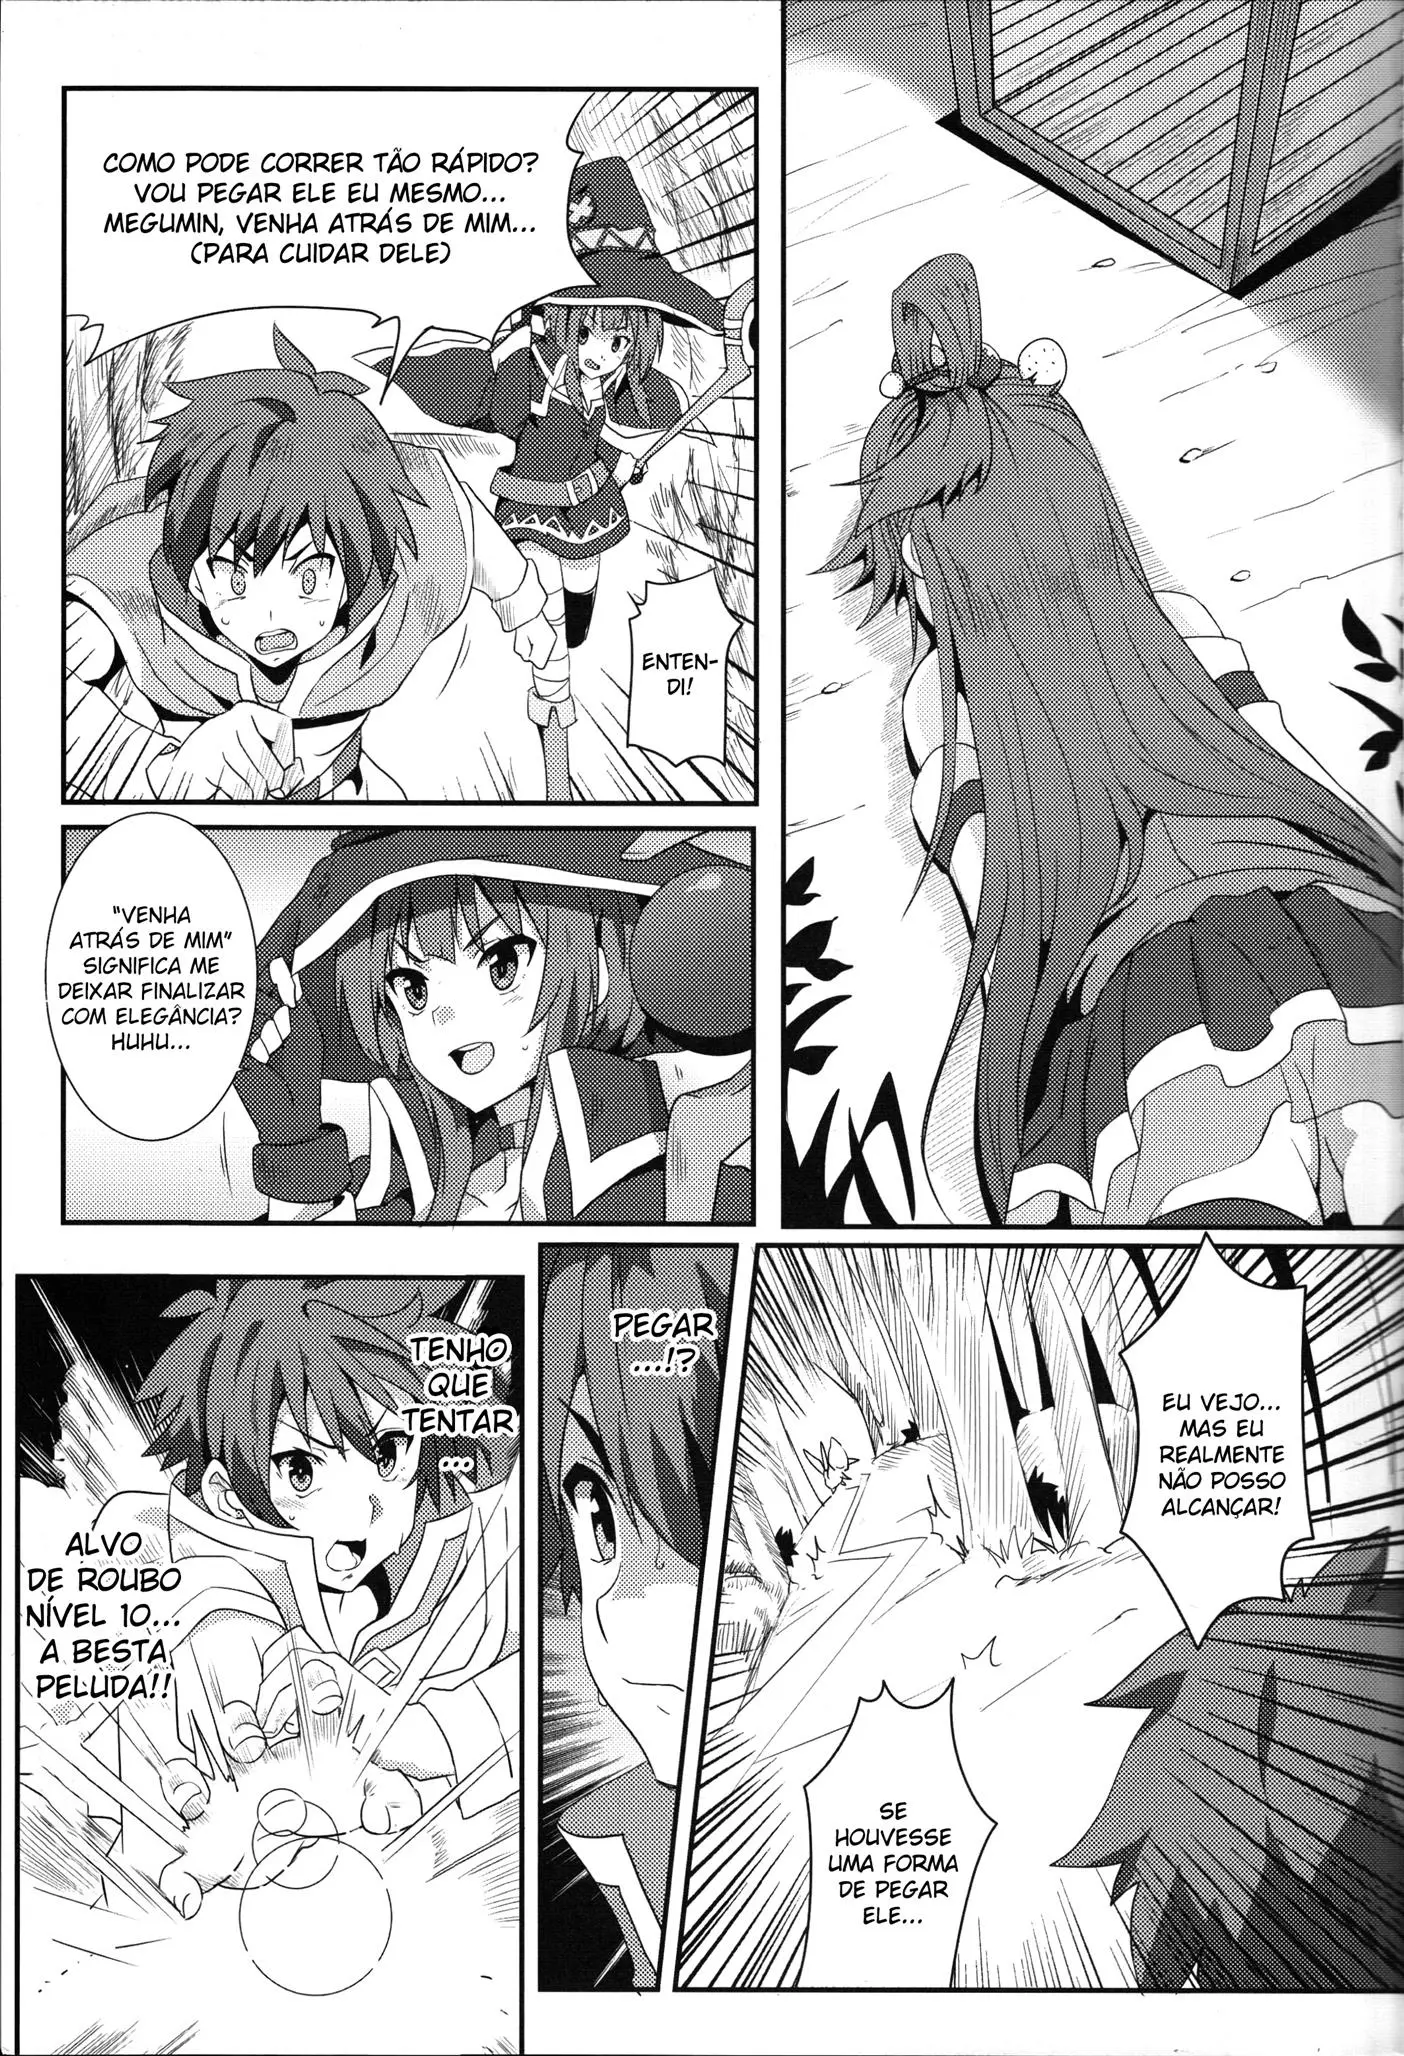 Blessing Megumin with a Magnificence Explosion! - Foto 6